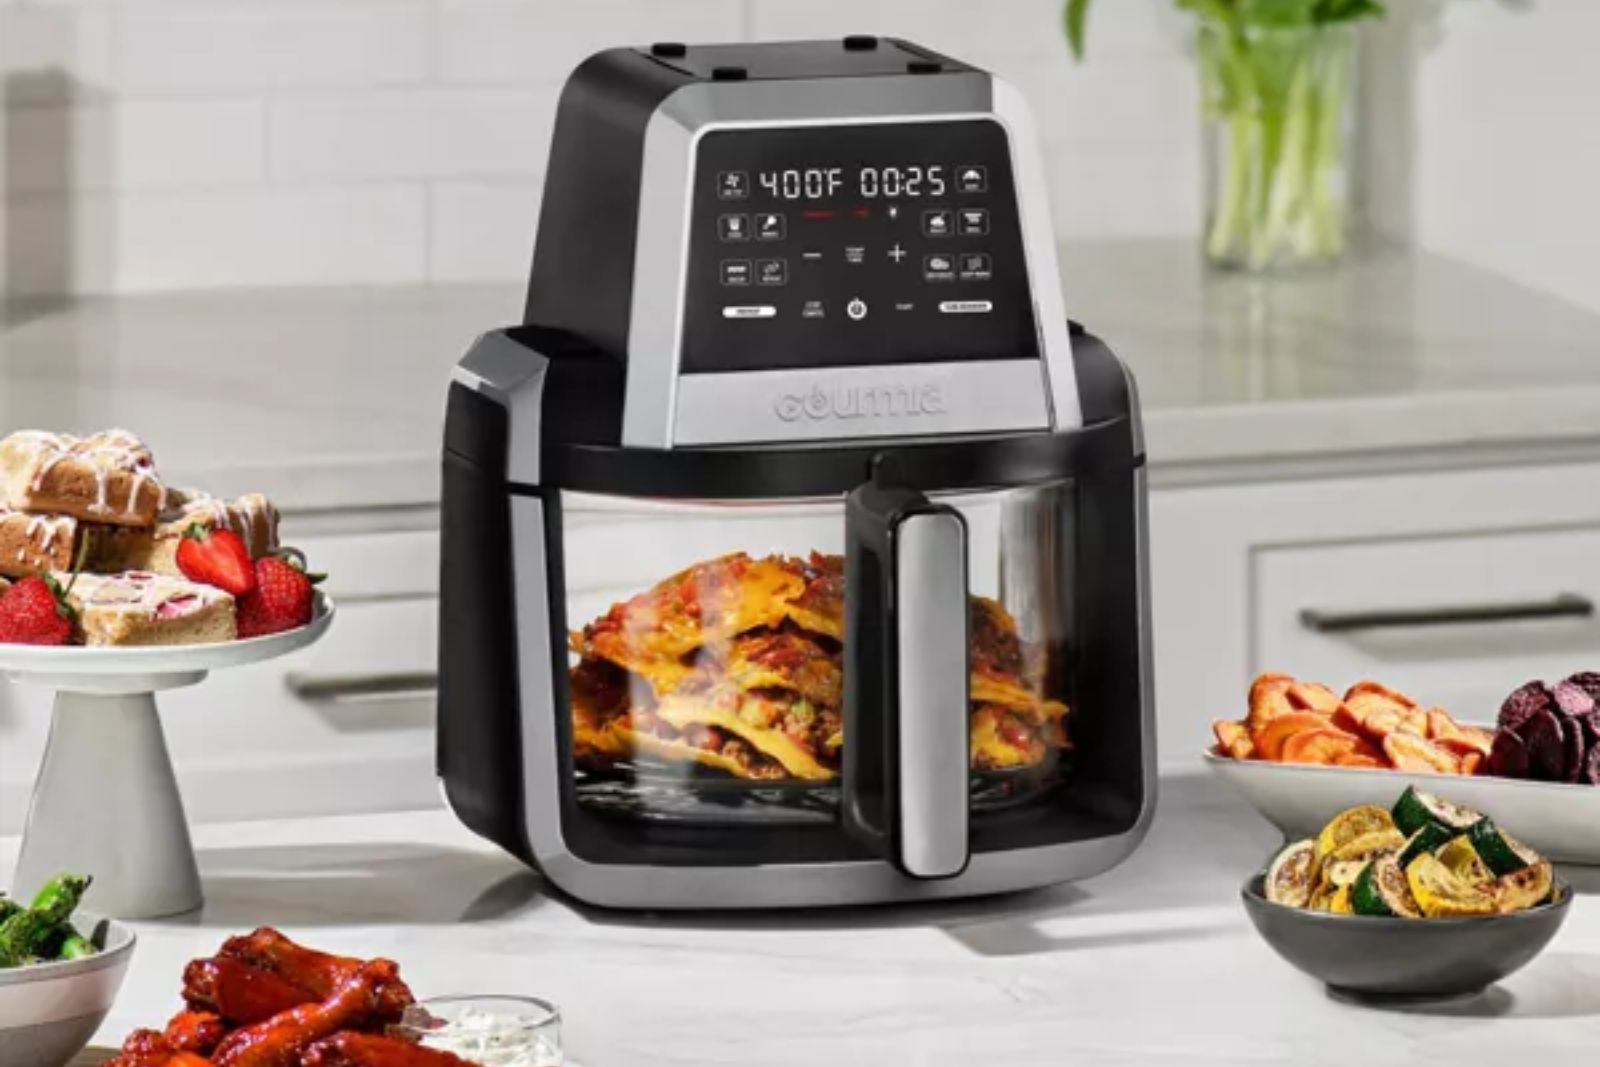 Enjoy backyard BBQ in your kitchen with the Gourmia Foodstation 5-in-1